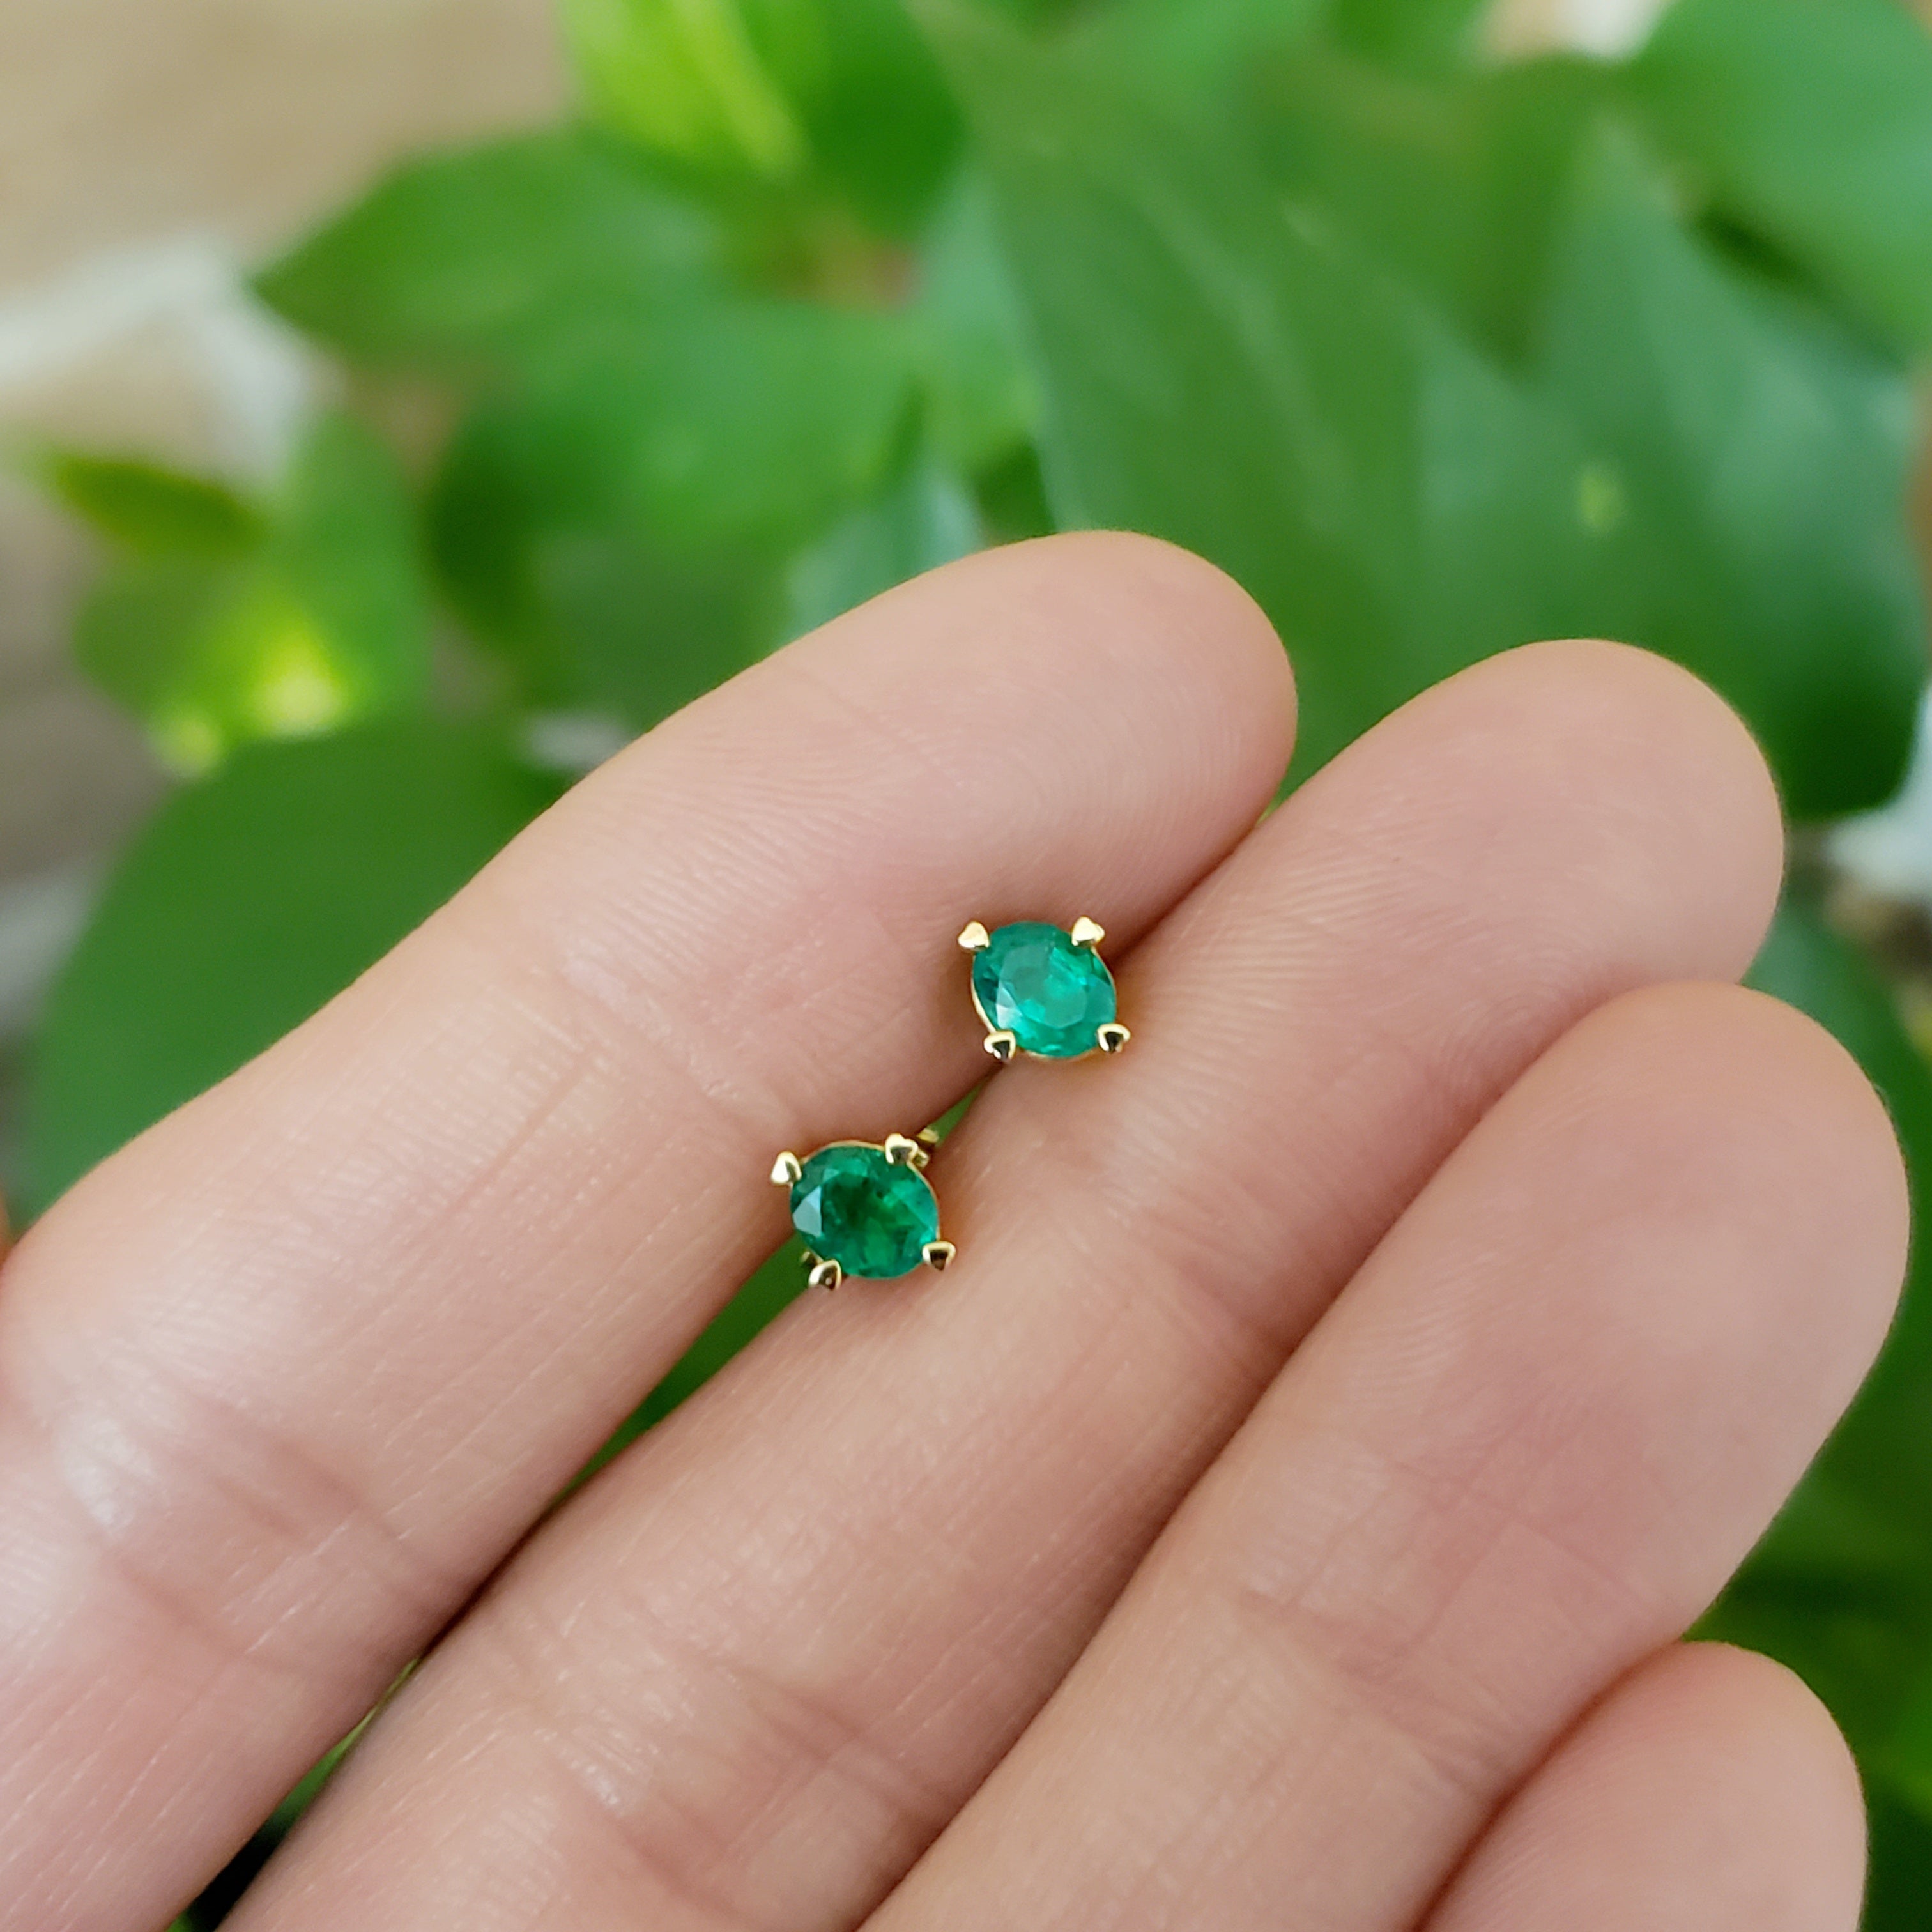 Emerald Earrings - Turn Your Look from Beautiful to Breathtaking